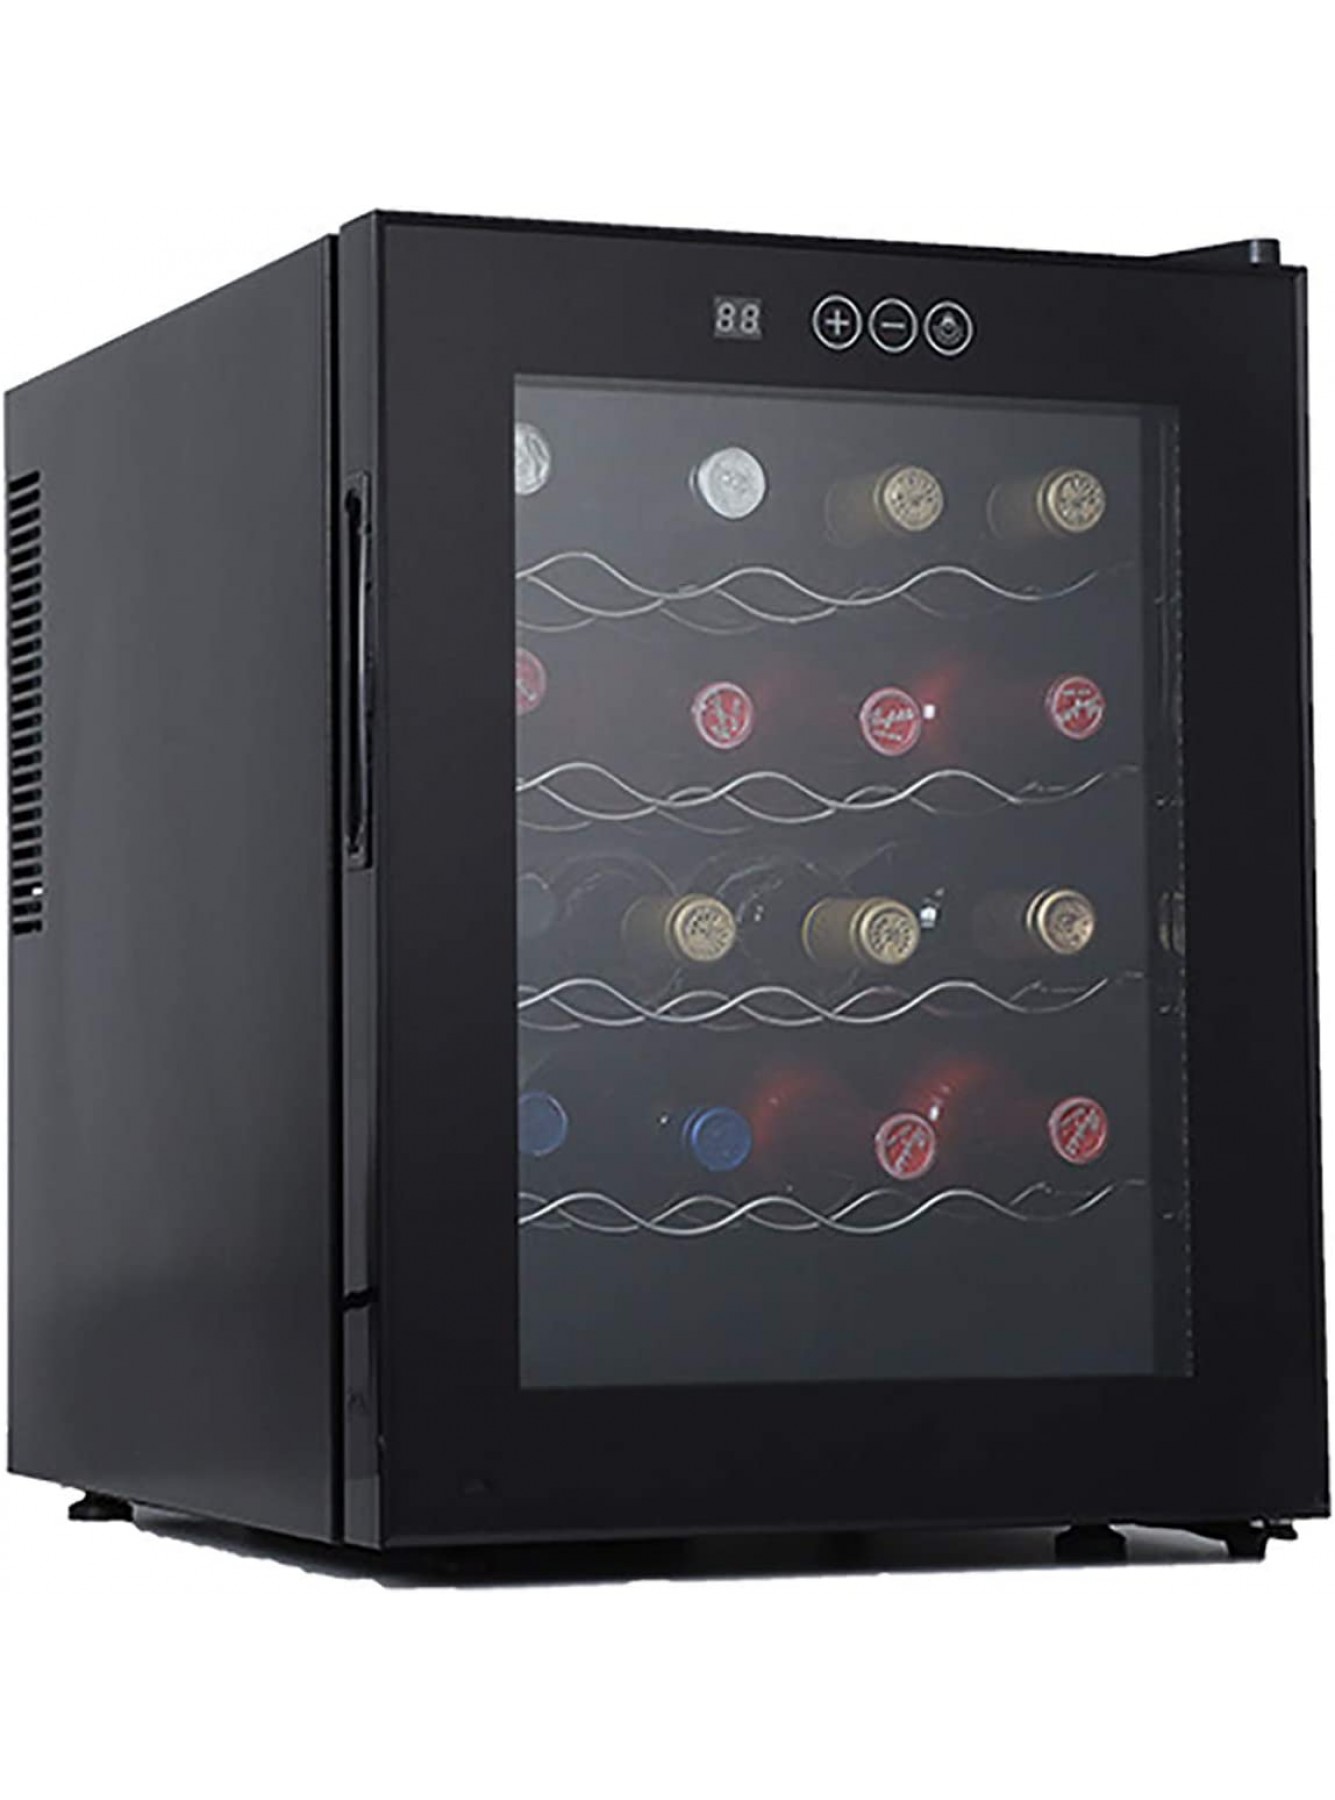 20 Bottle Wine Cellar Dual Zone Freestanding Wine Cooler Refrigerator Silent Shock Absorption Protect from Light Constant Temperature No Fog B08RS1MFXQ